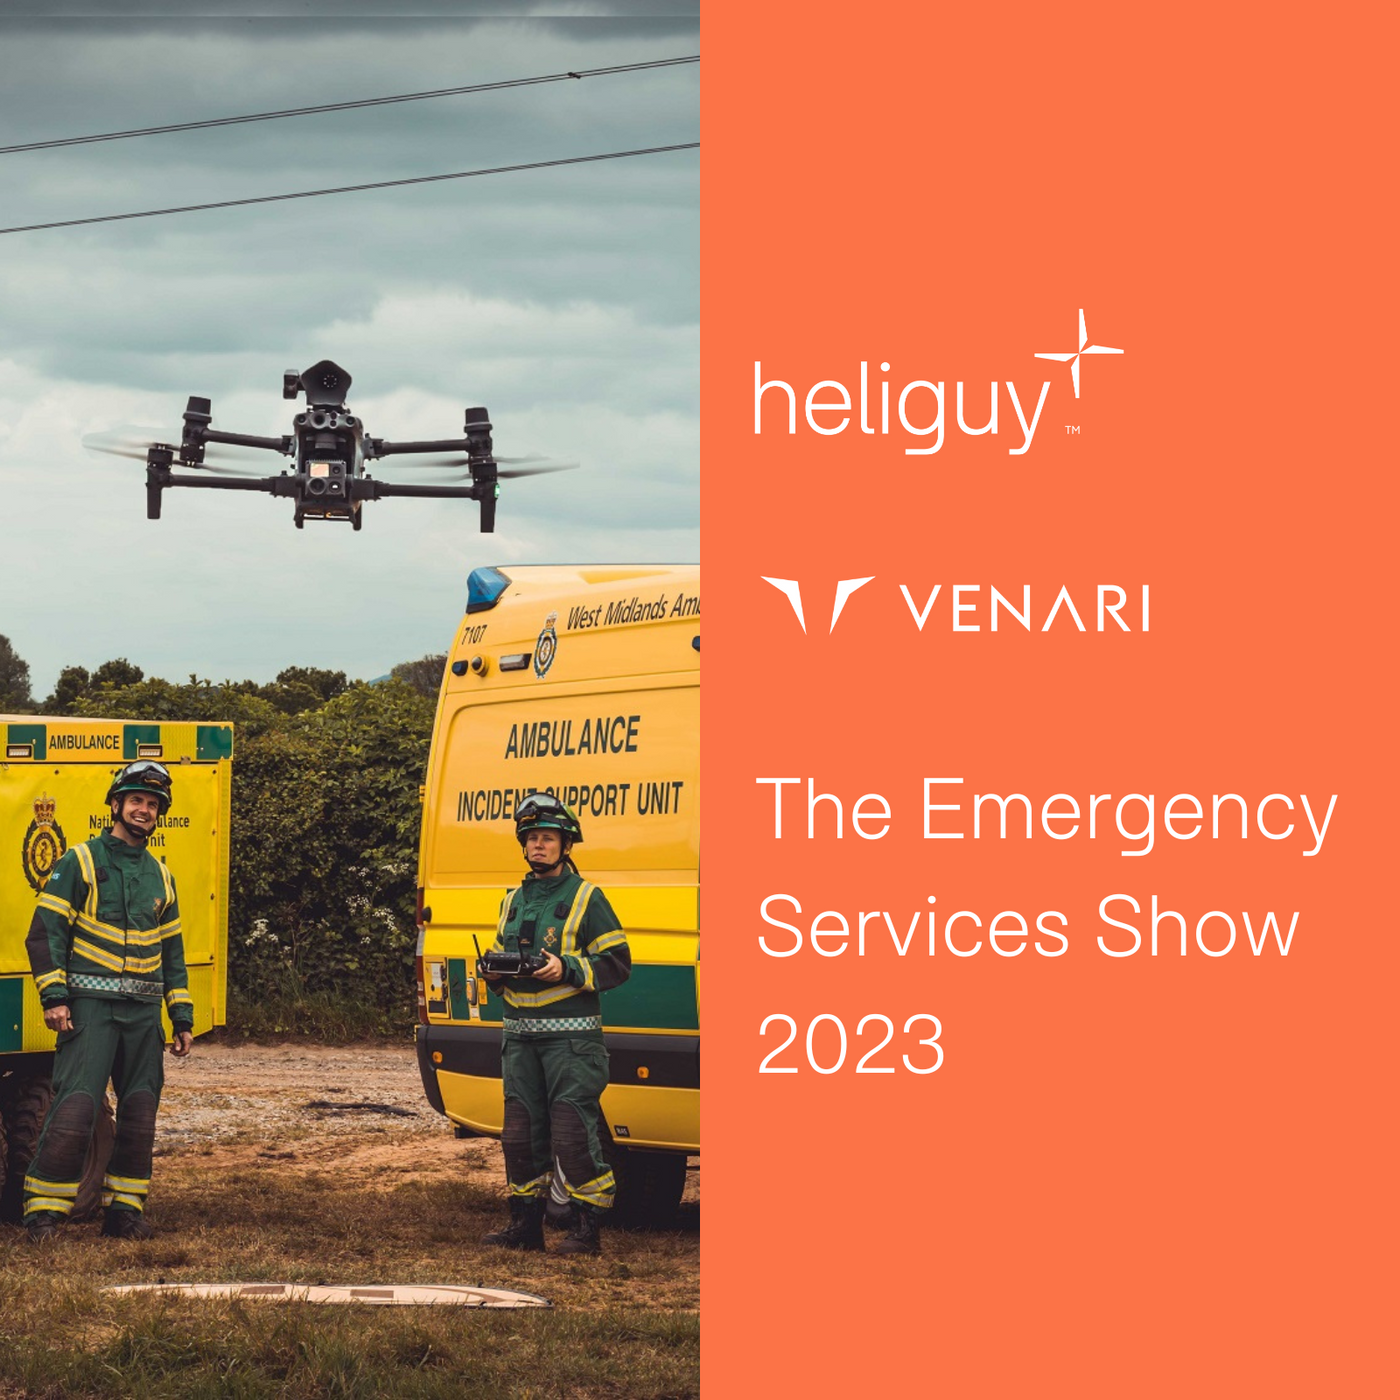 Heliguy Teams Up With Venari For Emergency Services Show 2023